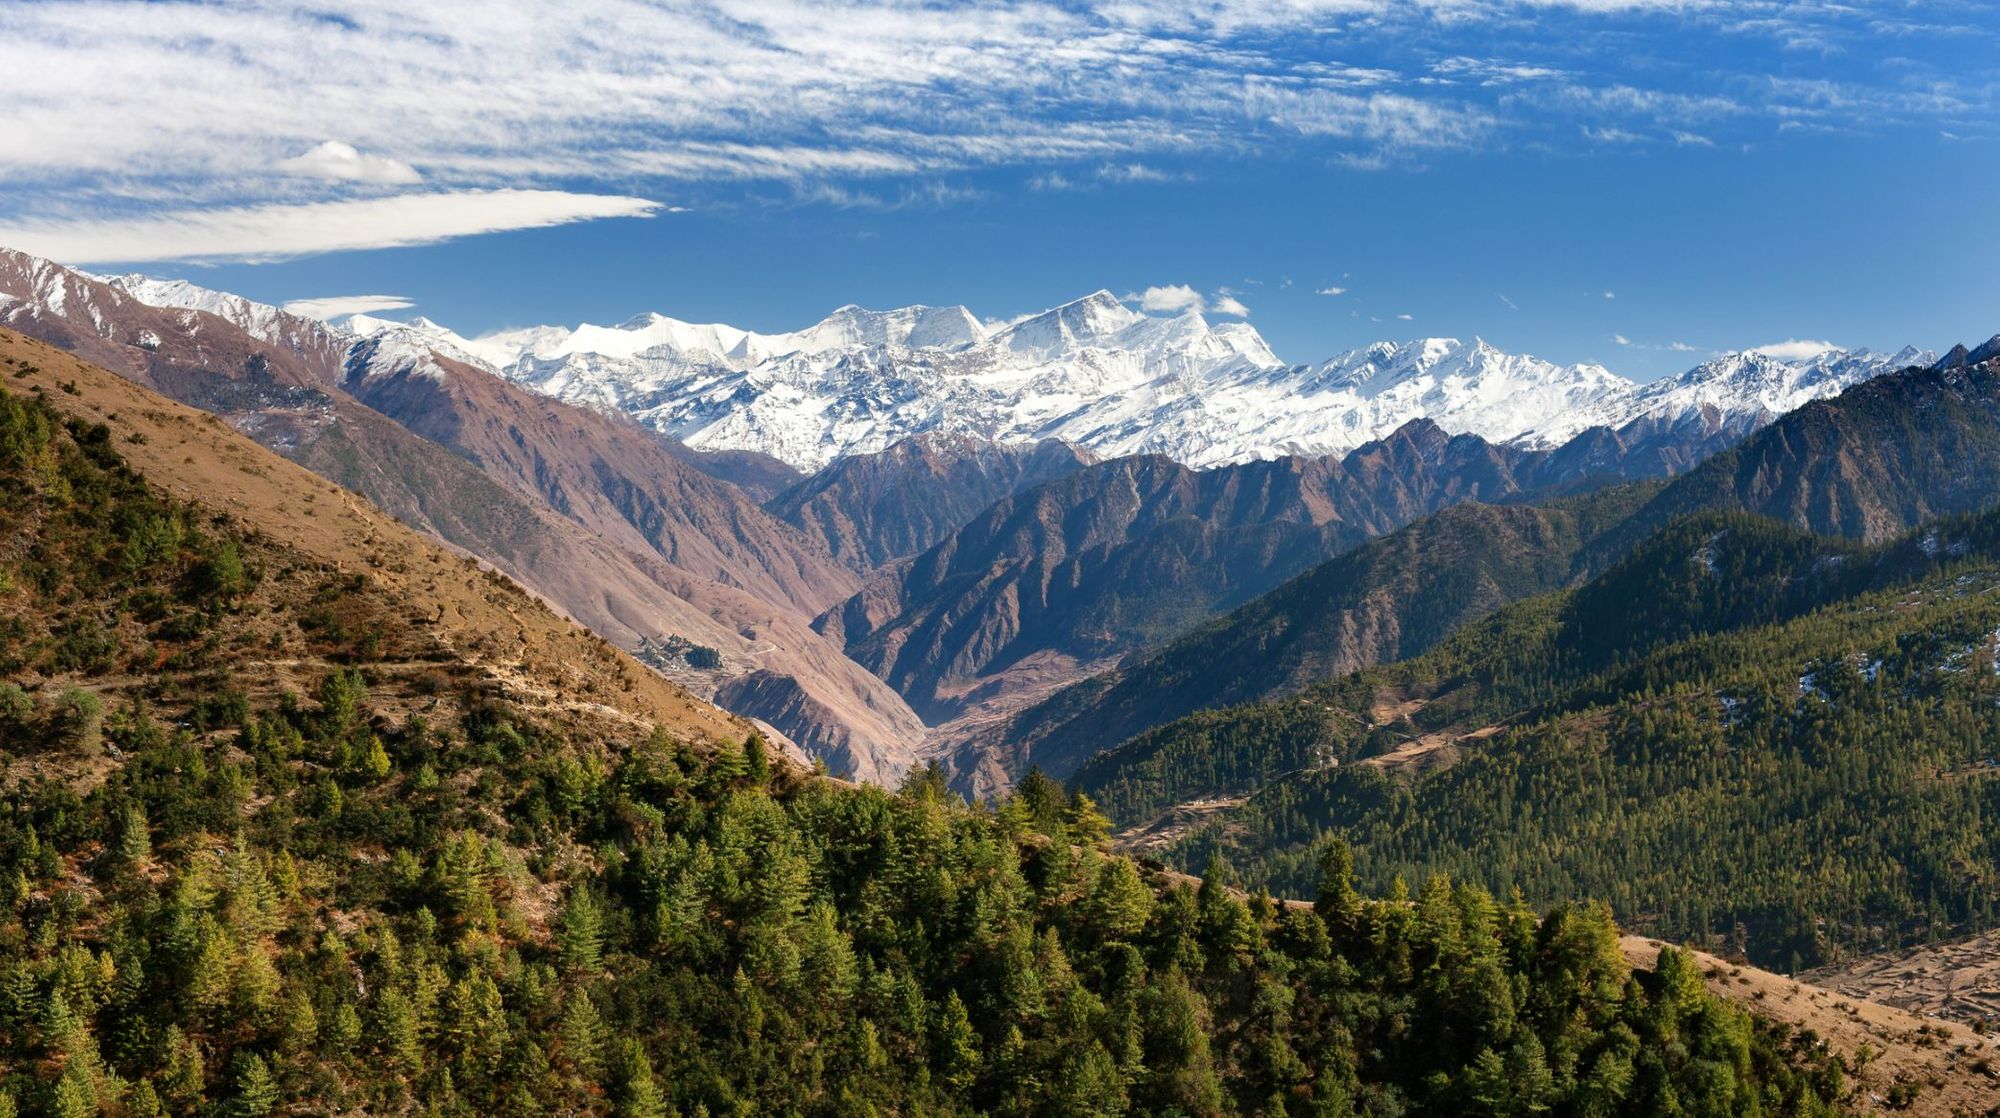 Lower Dolpo, and the landscape scenery around Dunai, Juphal villages and Dhaulagiri himal from the Balangra Lagna pass. Photo: Getty